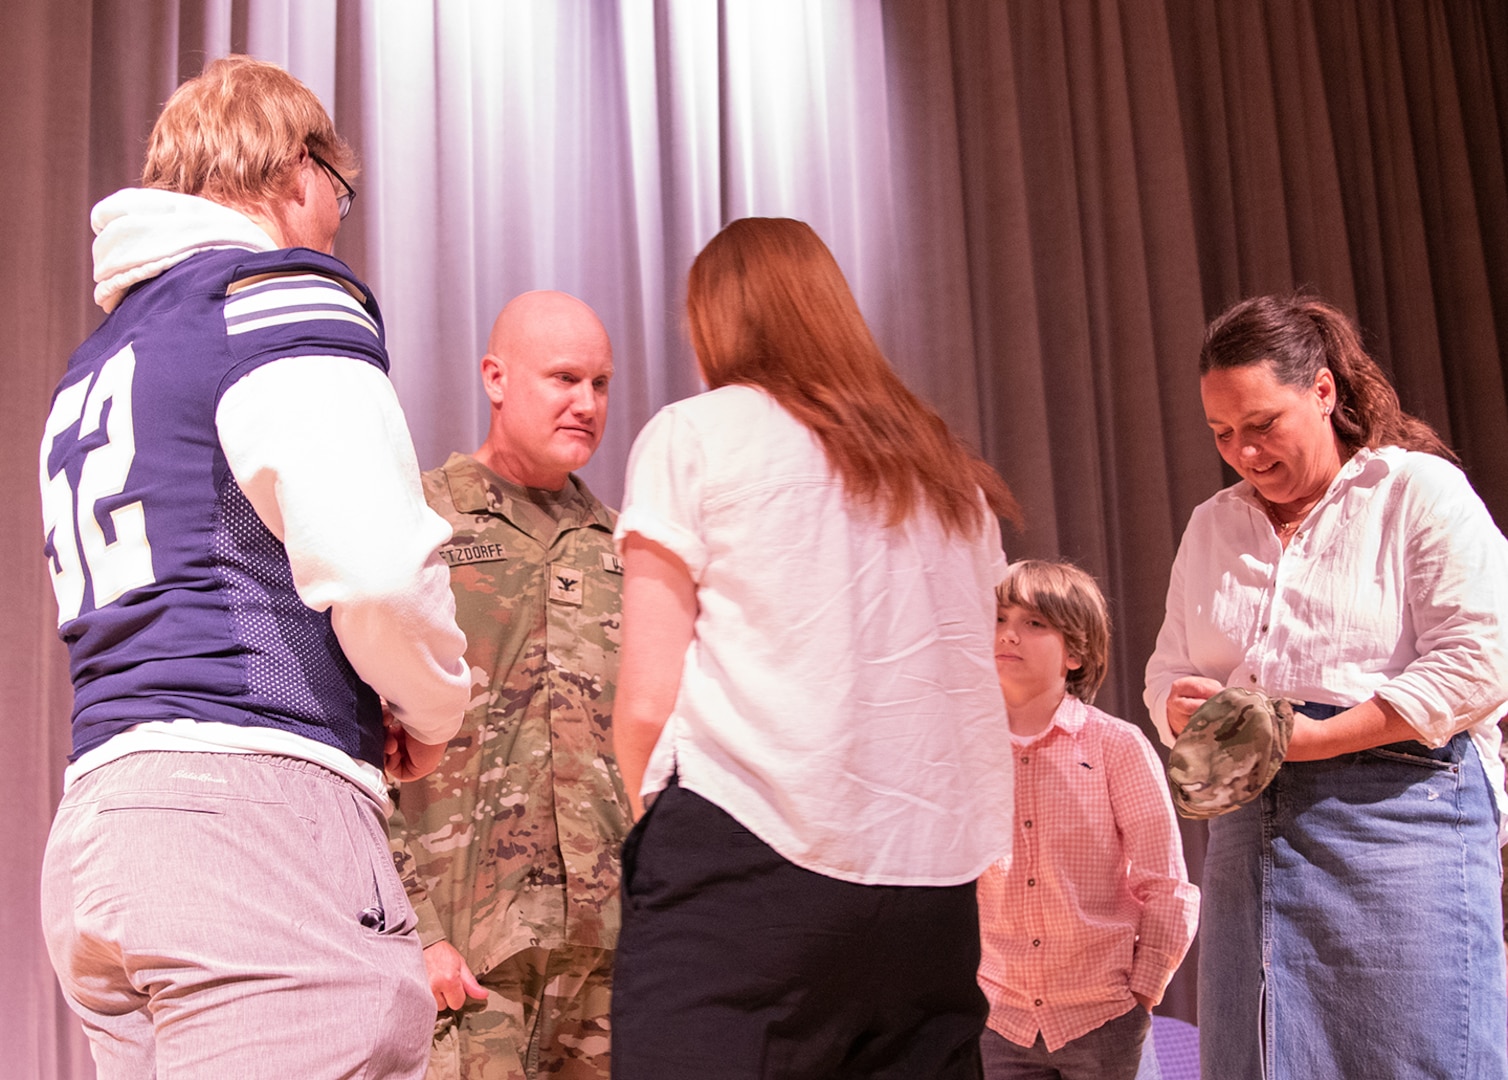 The family of newly promoted Illinois Army National Guard Col. Paul Metzdorff, including wife, Alyson, and children, Isabella, Jackson, and Cooper, secure new rank during a ceremony Sept. 8 at the Astroth Community Education Center, Heartland Community College, Normal, Illinois.